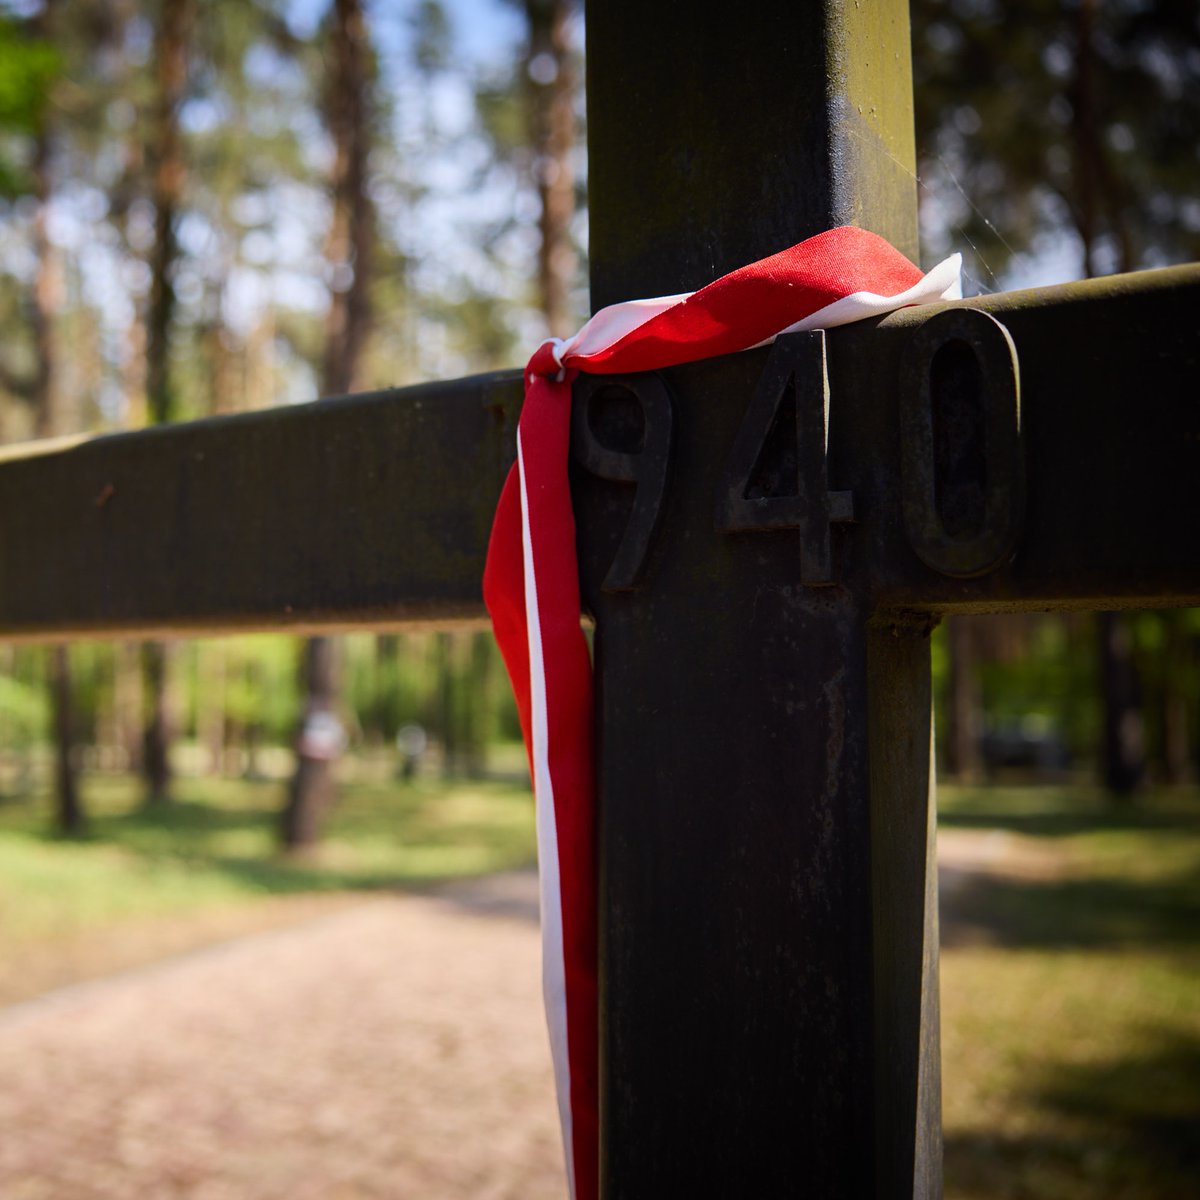 In Bykivnia, where I went on the Day of Remembrance of the Victims of Political Repressions, there are also Polish victims of the Katyn massacre. In 1940, the Soviet NKVD brutally executed them on Kremlin orders. The memory of the horrible times of terror compels us to work